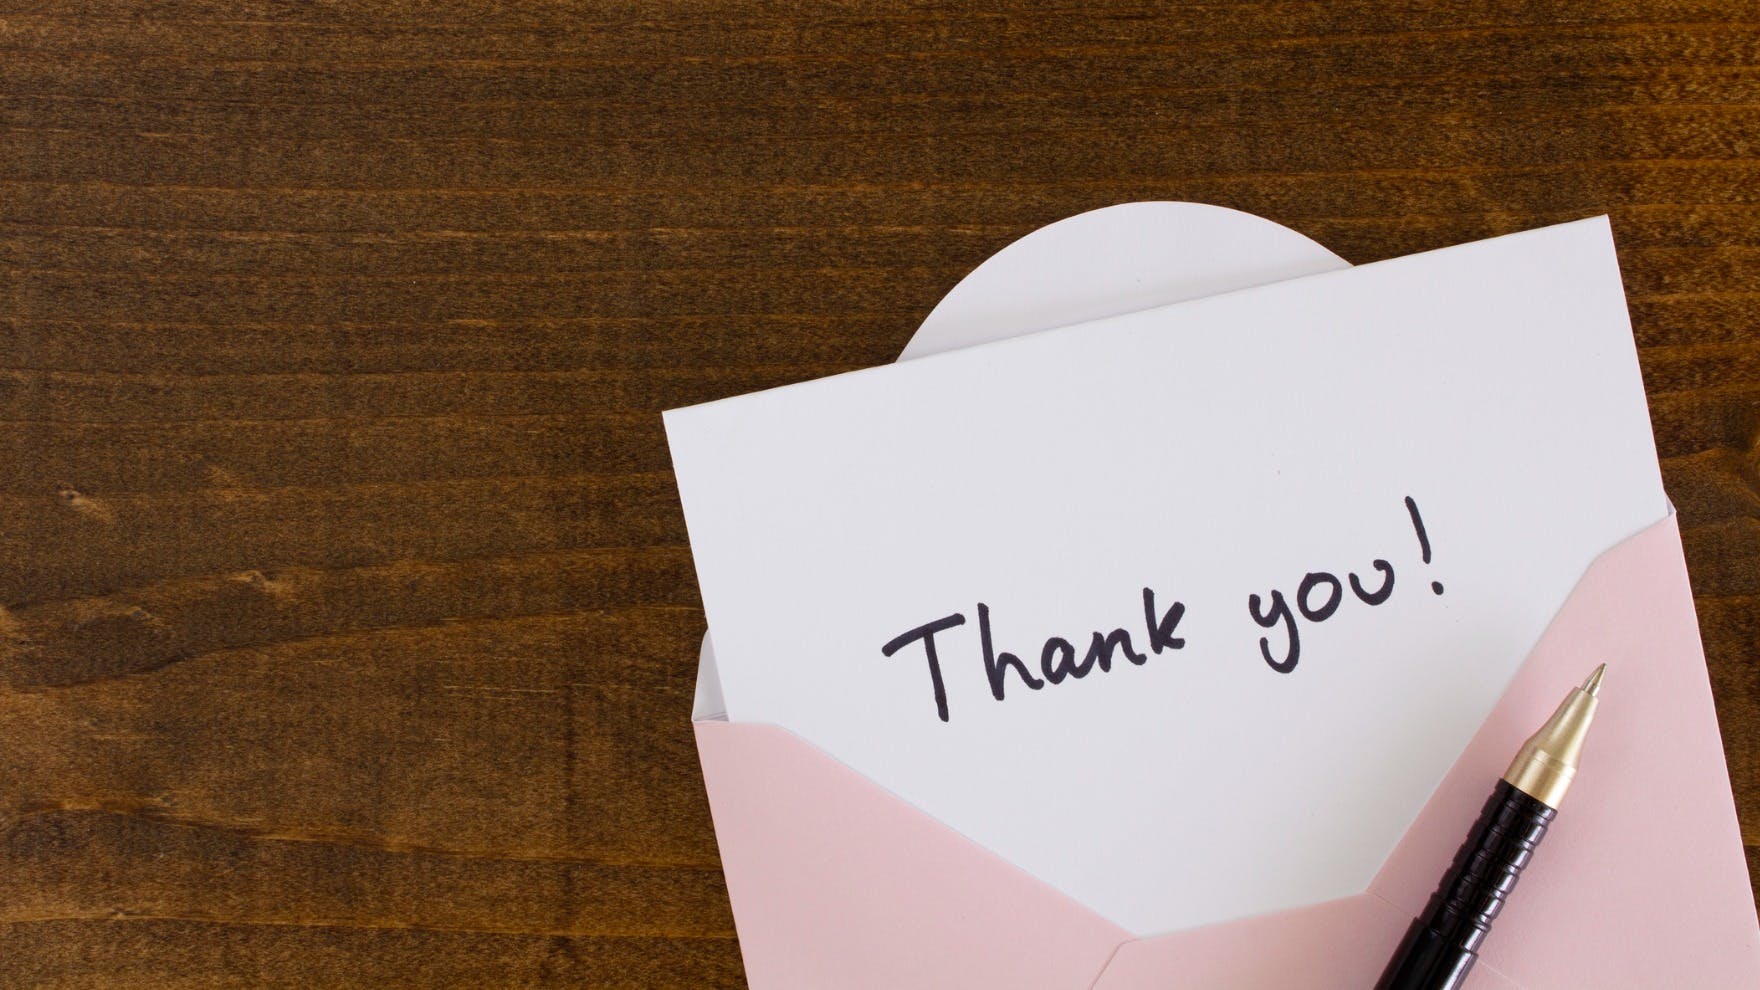 Greatful or Grateful? | Correct Spelling for Your Thank You Note